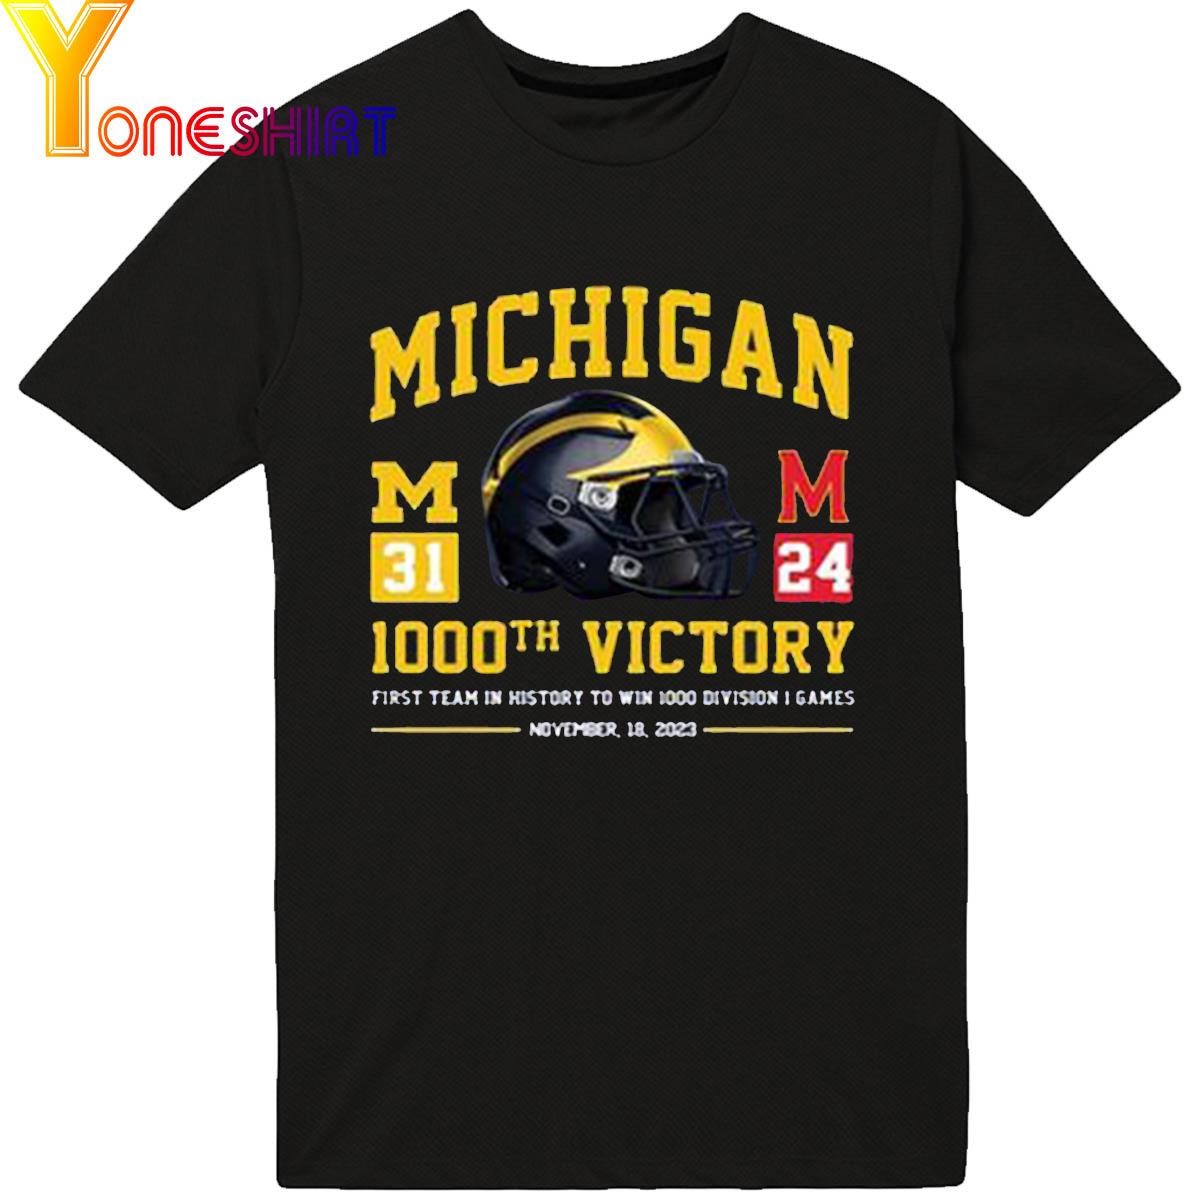 Michigan Wolverines vs Maryland Terrapins 31 24 1000th Victory First team in history to win 1000 wins division 1 games shirt